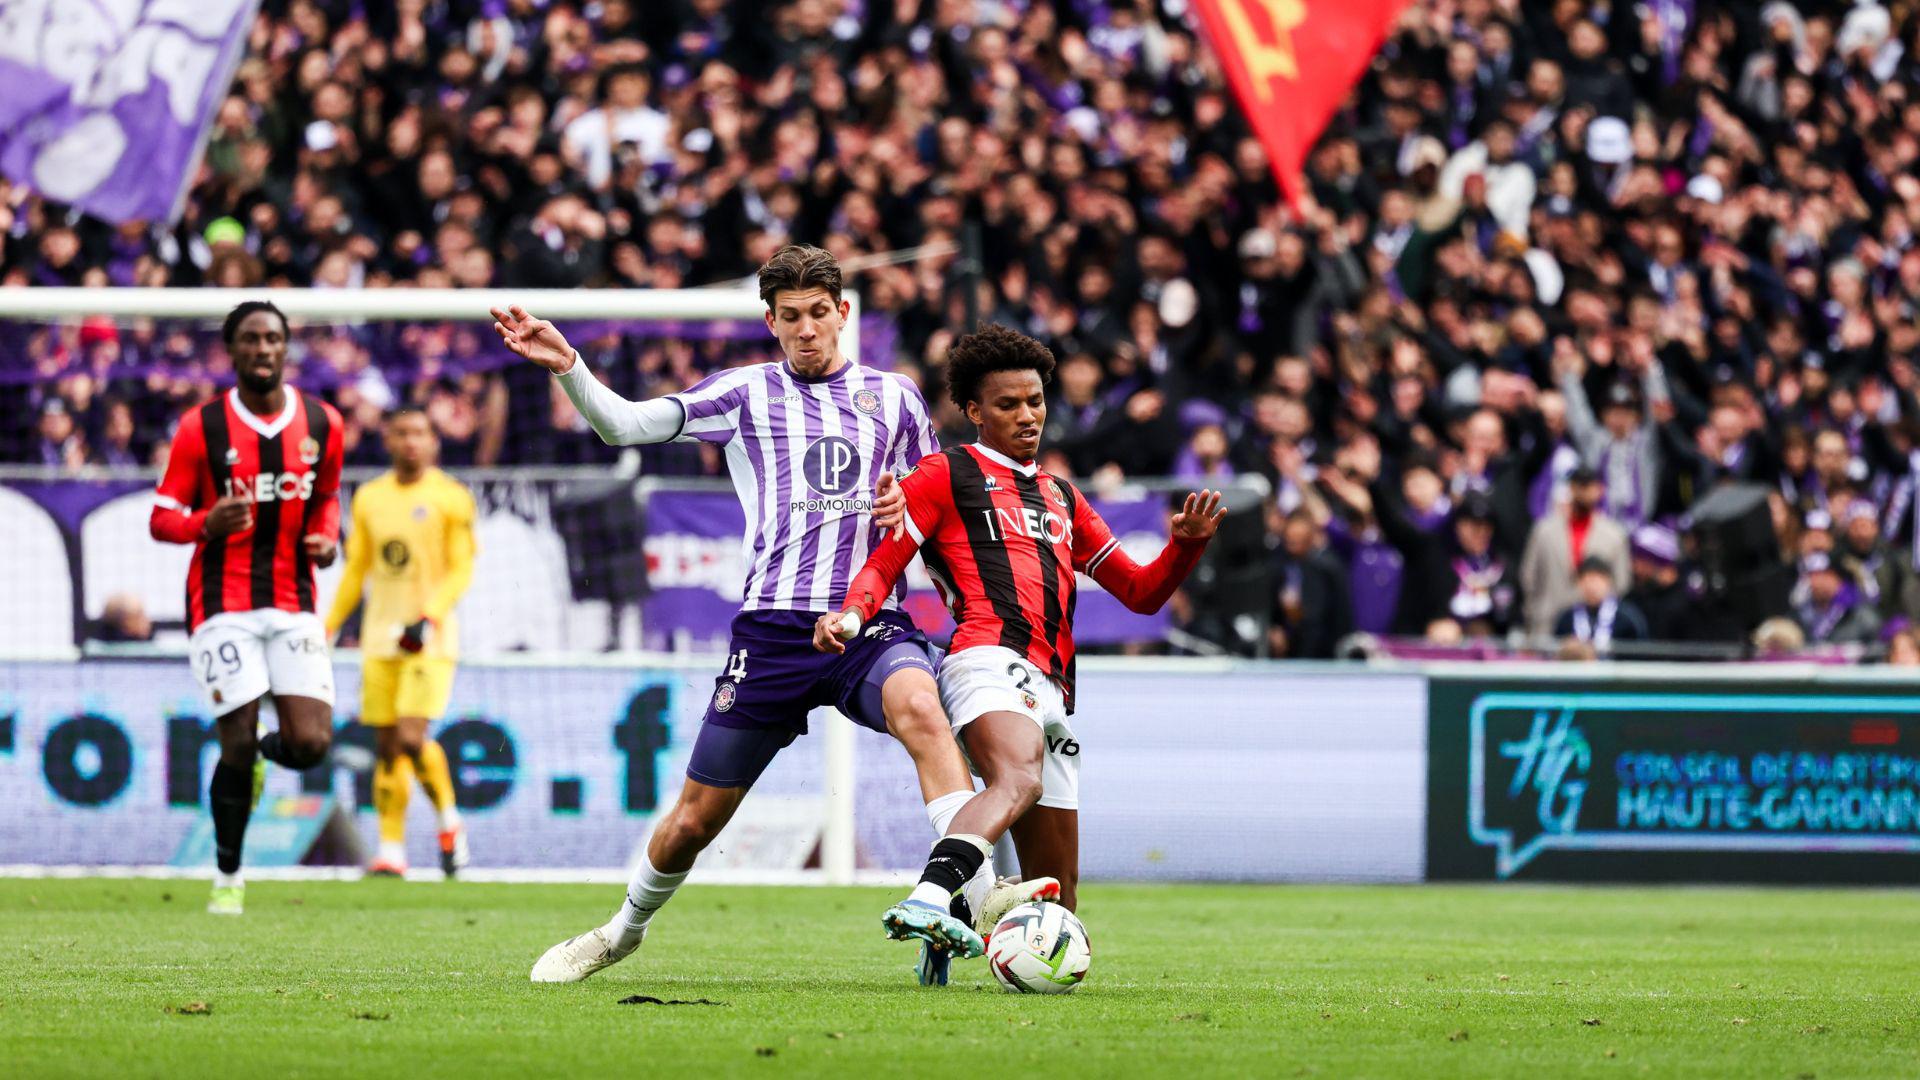 VIDEO | Ligue 1 Highlights: Toulouse vs Nice